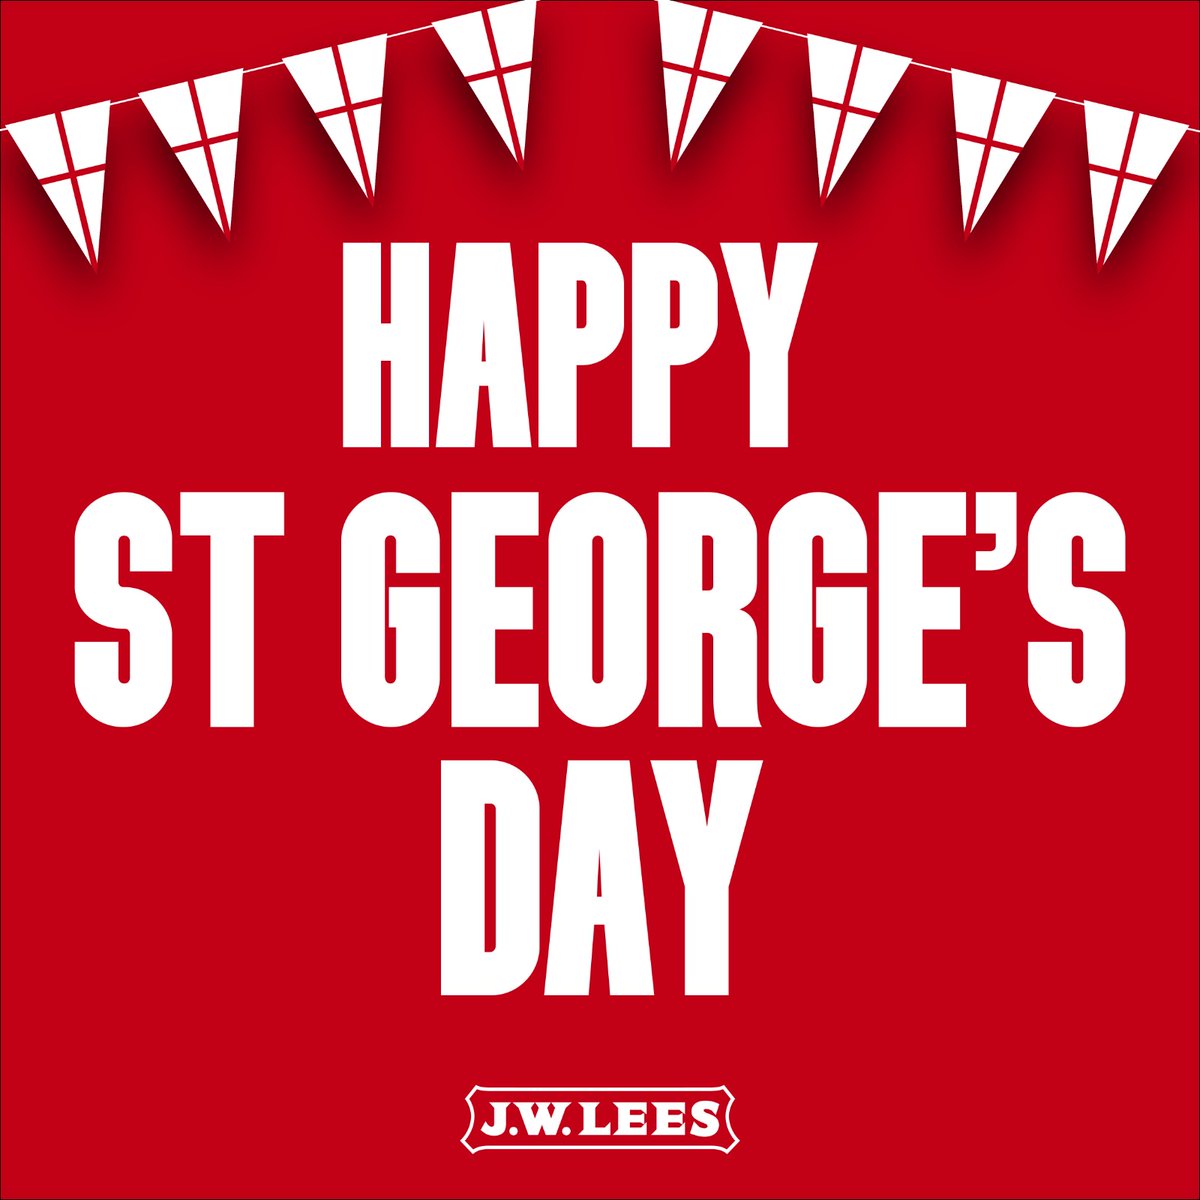 #StGeorgesDay Celebrate with us with a free pint today, simply RT and ♥️, then pop down and we will buy you a beer 🍻🏴󠁧󠁢󠁥󠁮󠁧󠁿🍻🏴󠁧󠁢󠁥󠁮󠁧󠁿🍻🏴󠁧󠁢󠁥󠁮󠁧󠁿🍻